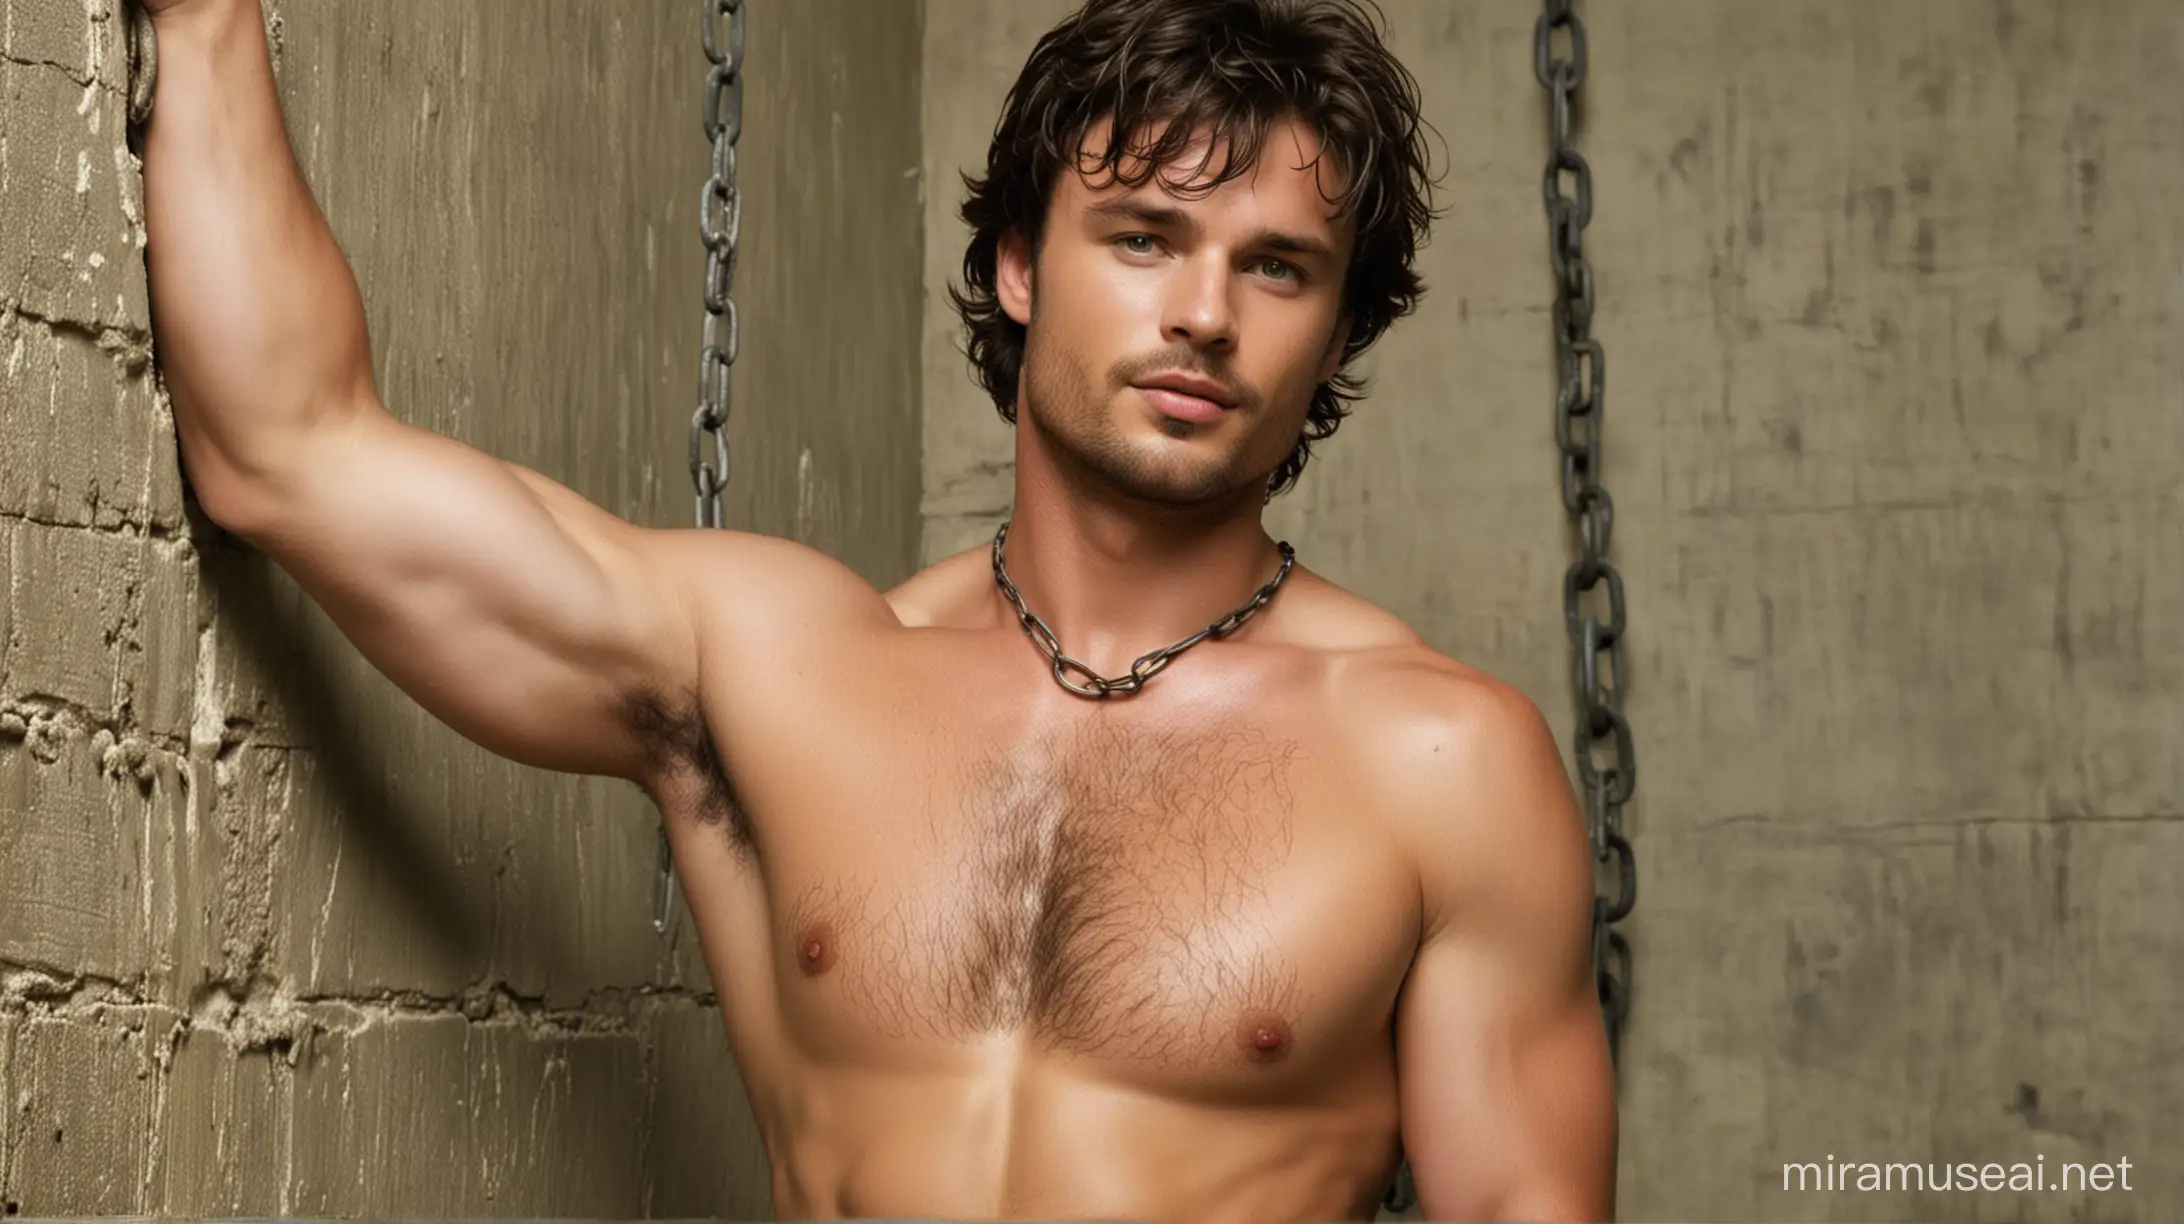 Old prison. Hairy teenage version of 15-year-old actor Tom Welling, but with a beard and a hairy body. Welling is a prisoner, green eyes, shirtless, very hairy chest, arms raised and stretched, wrists tied with chains to the prison wall, showing very hairy armpits, short hair, serious expression, bearded, very hairy body and chest.